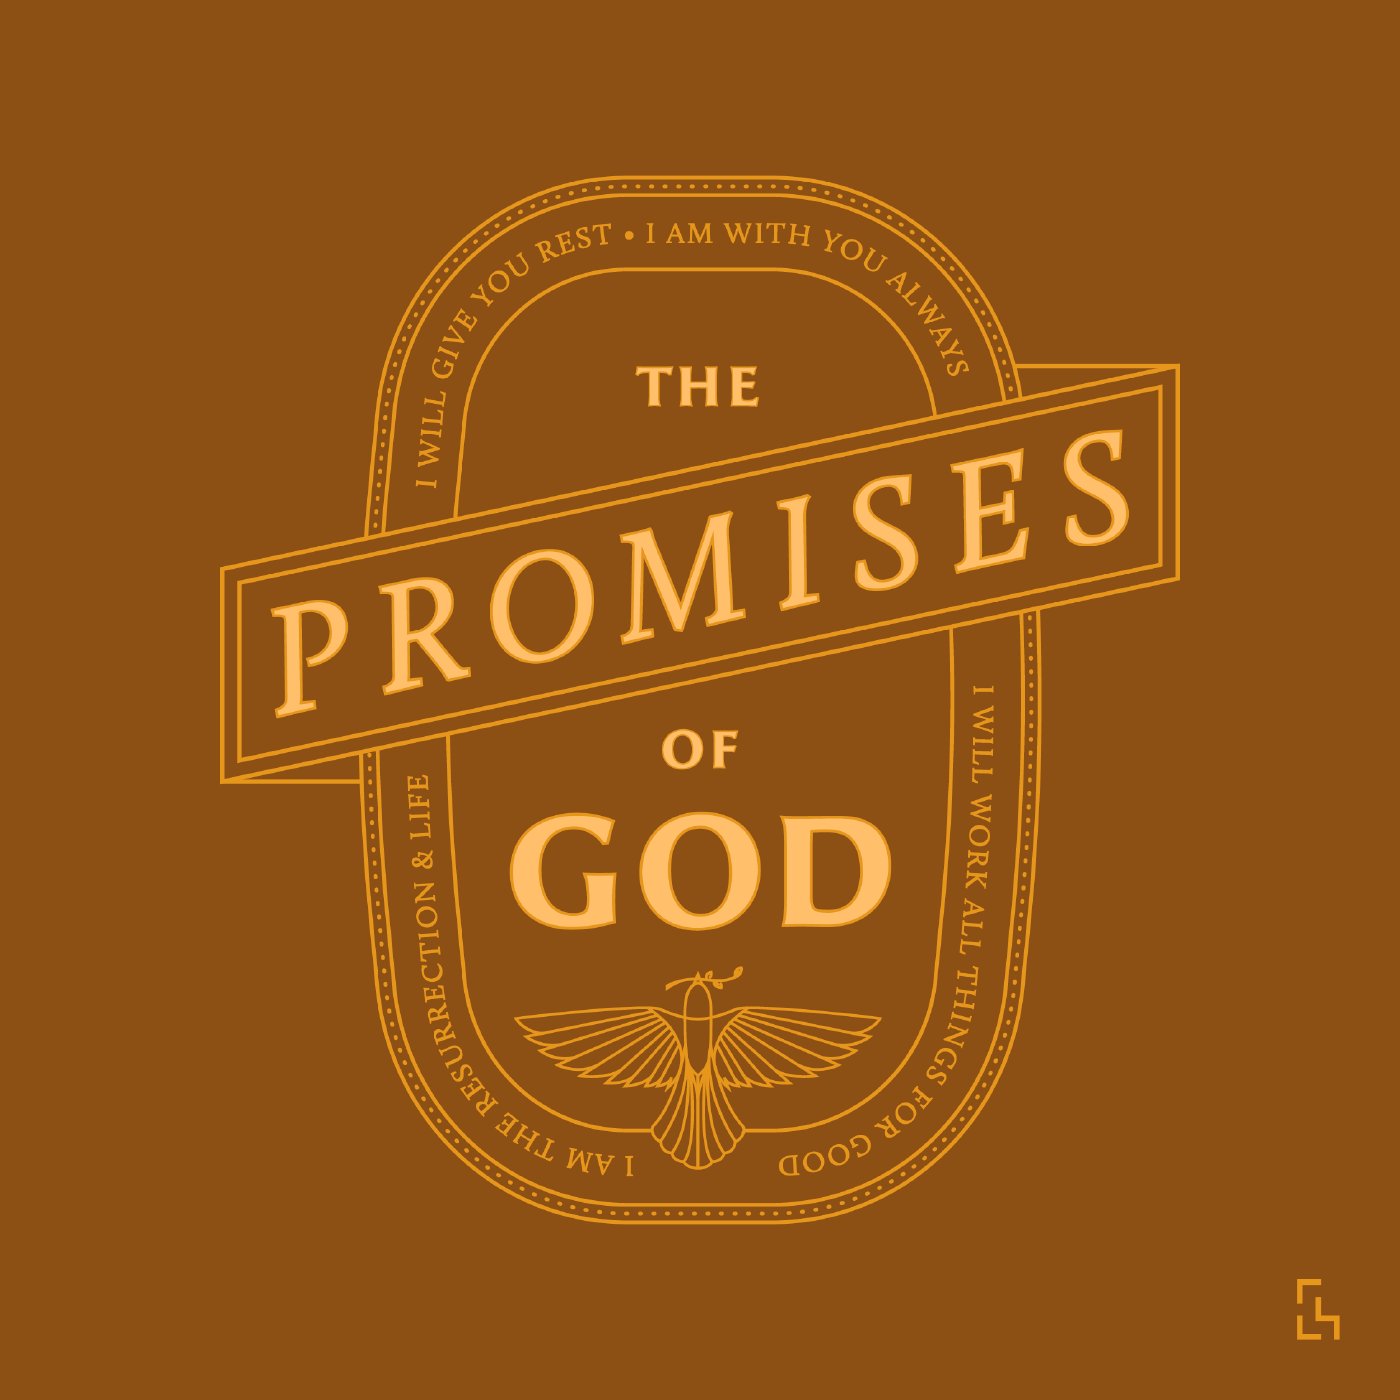 The Promises of God - I Am With You